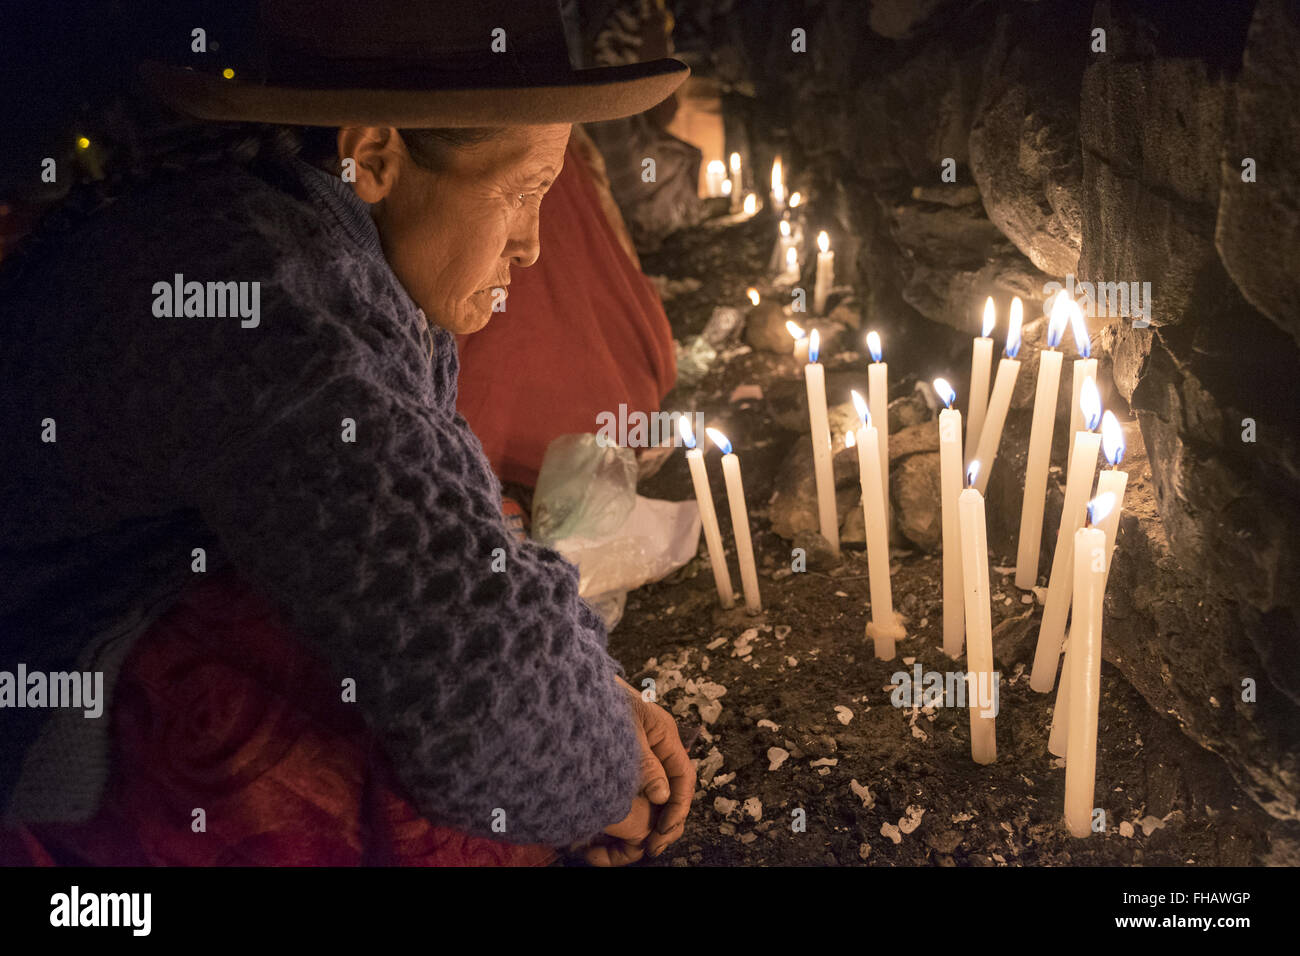 A woman puts candles in the sanctuary in the celebration of the feast of Qoyllur Riti Stock Photo